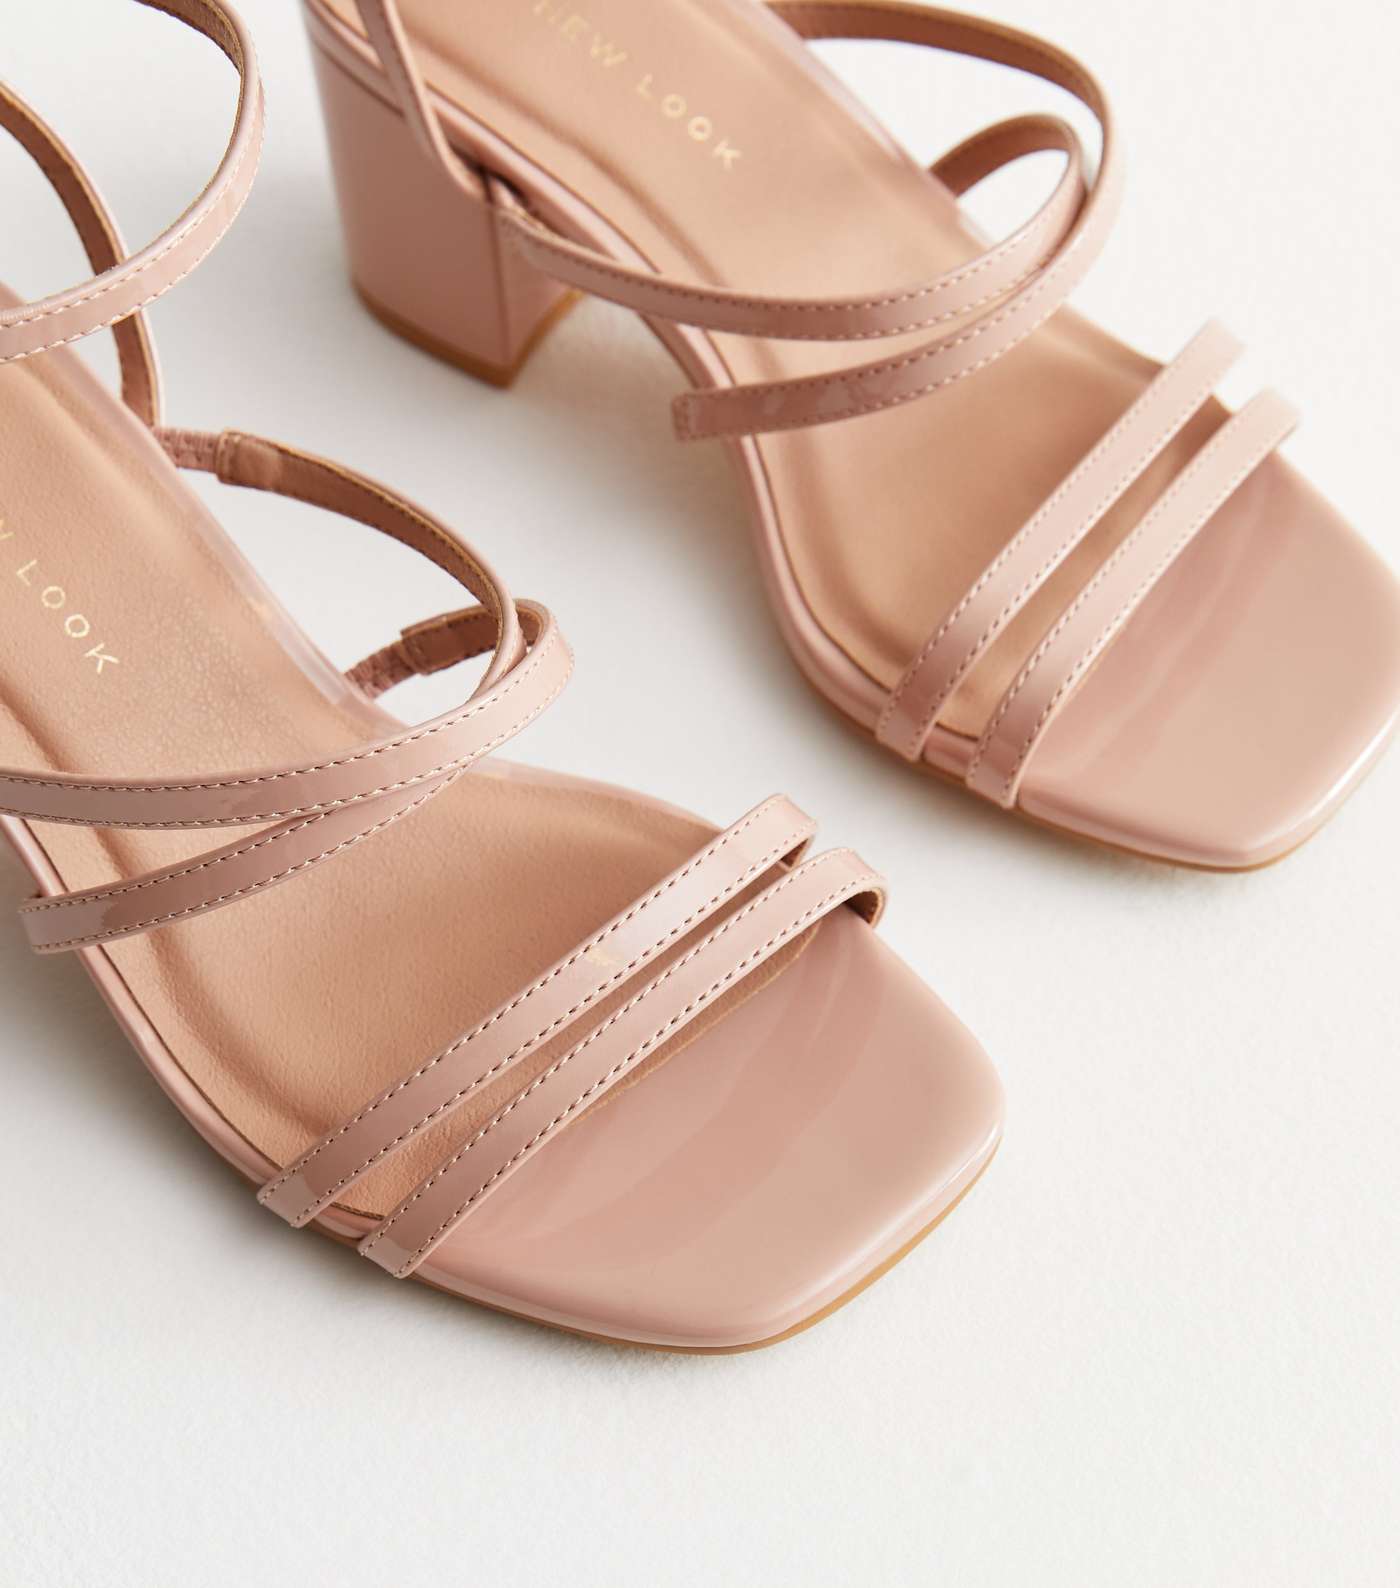 Extra Wide Fit Pale Pink Patent Strappy Mid Block Heel Sandals Image 4